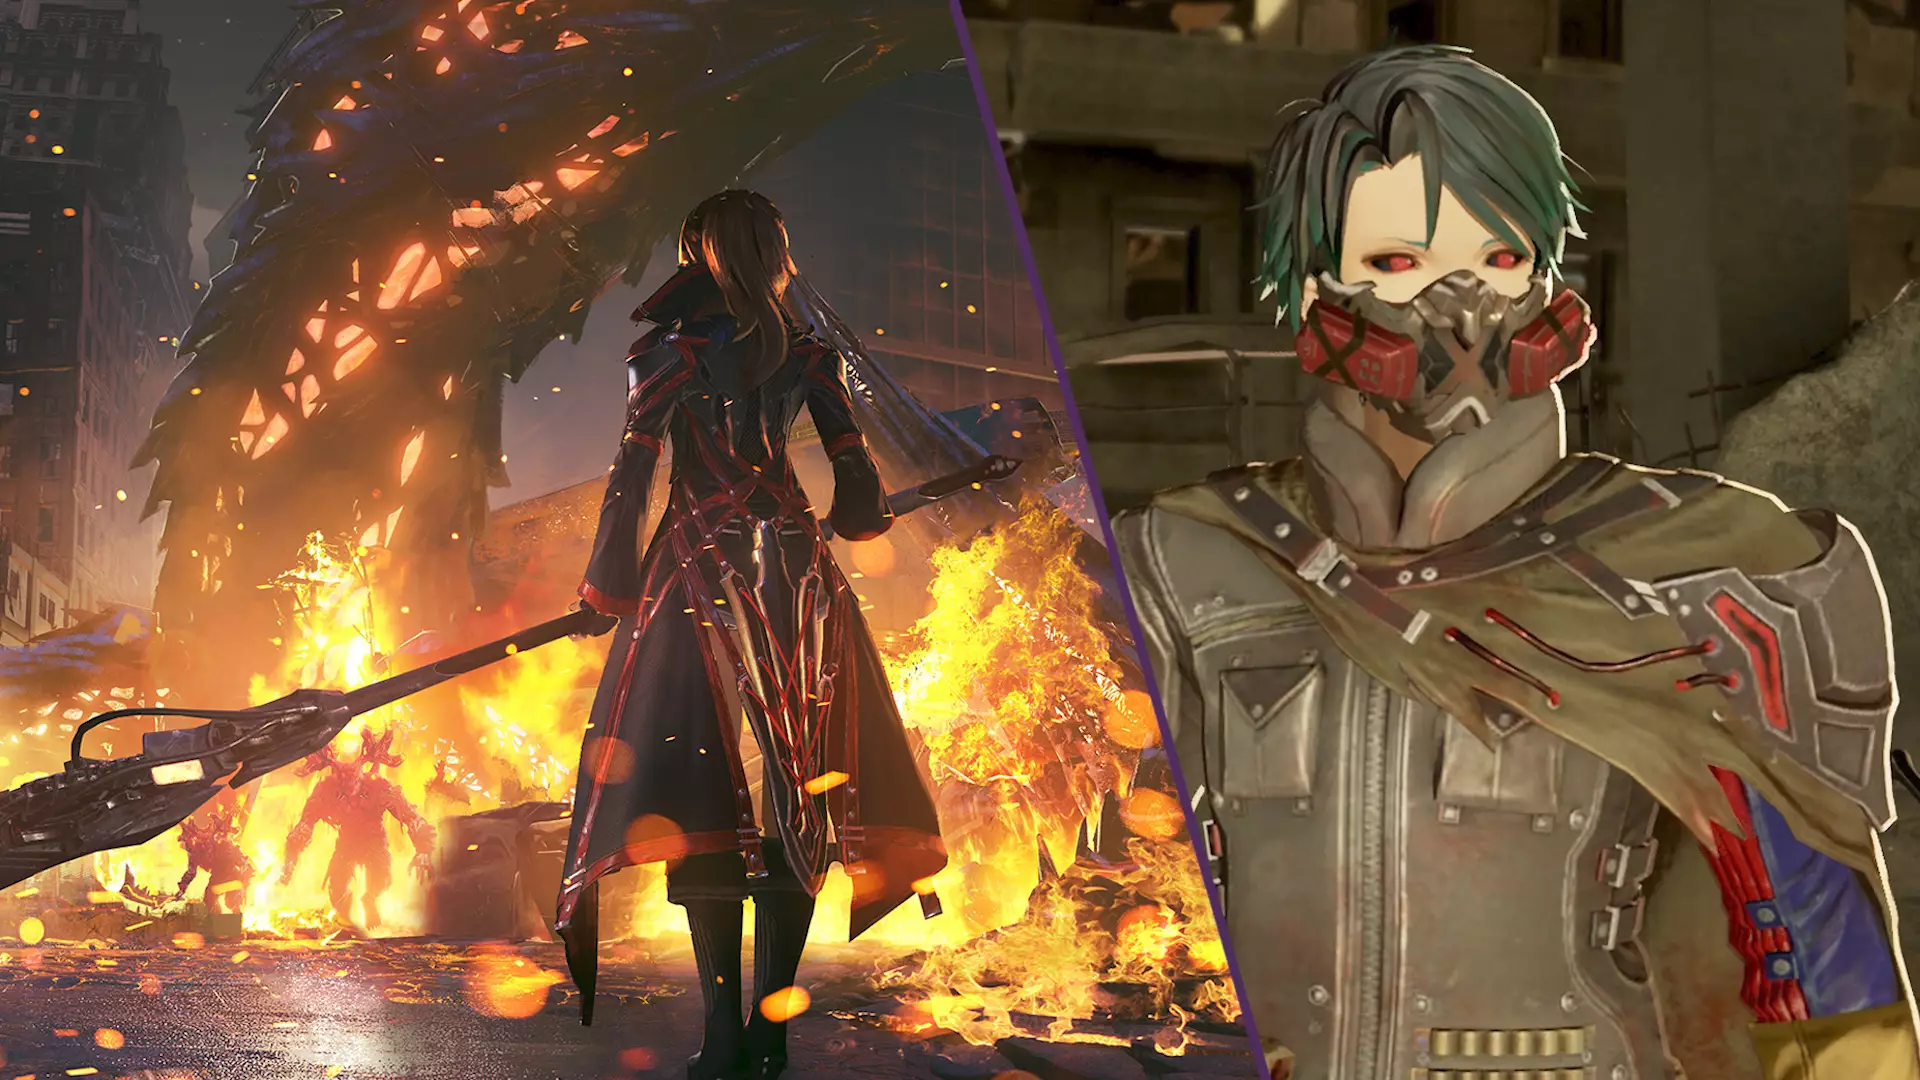 'Code Vein' Really Is Anime 'Dark Souls', And I Love It